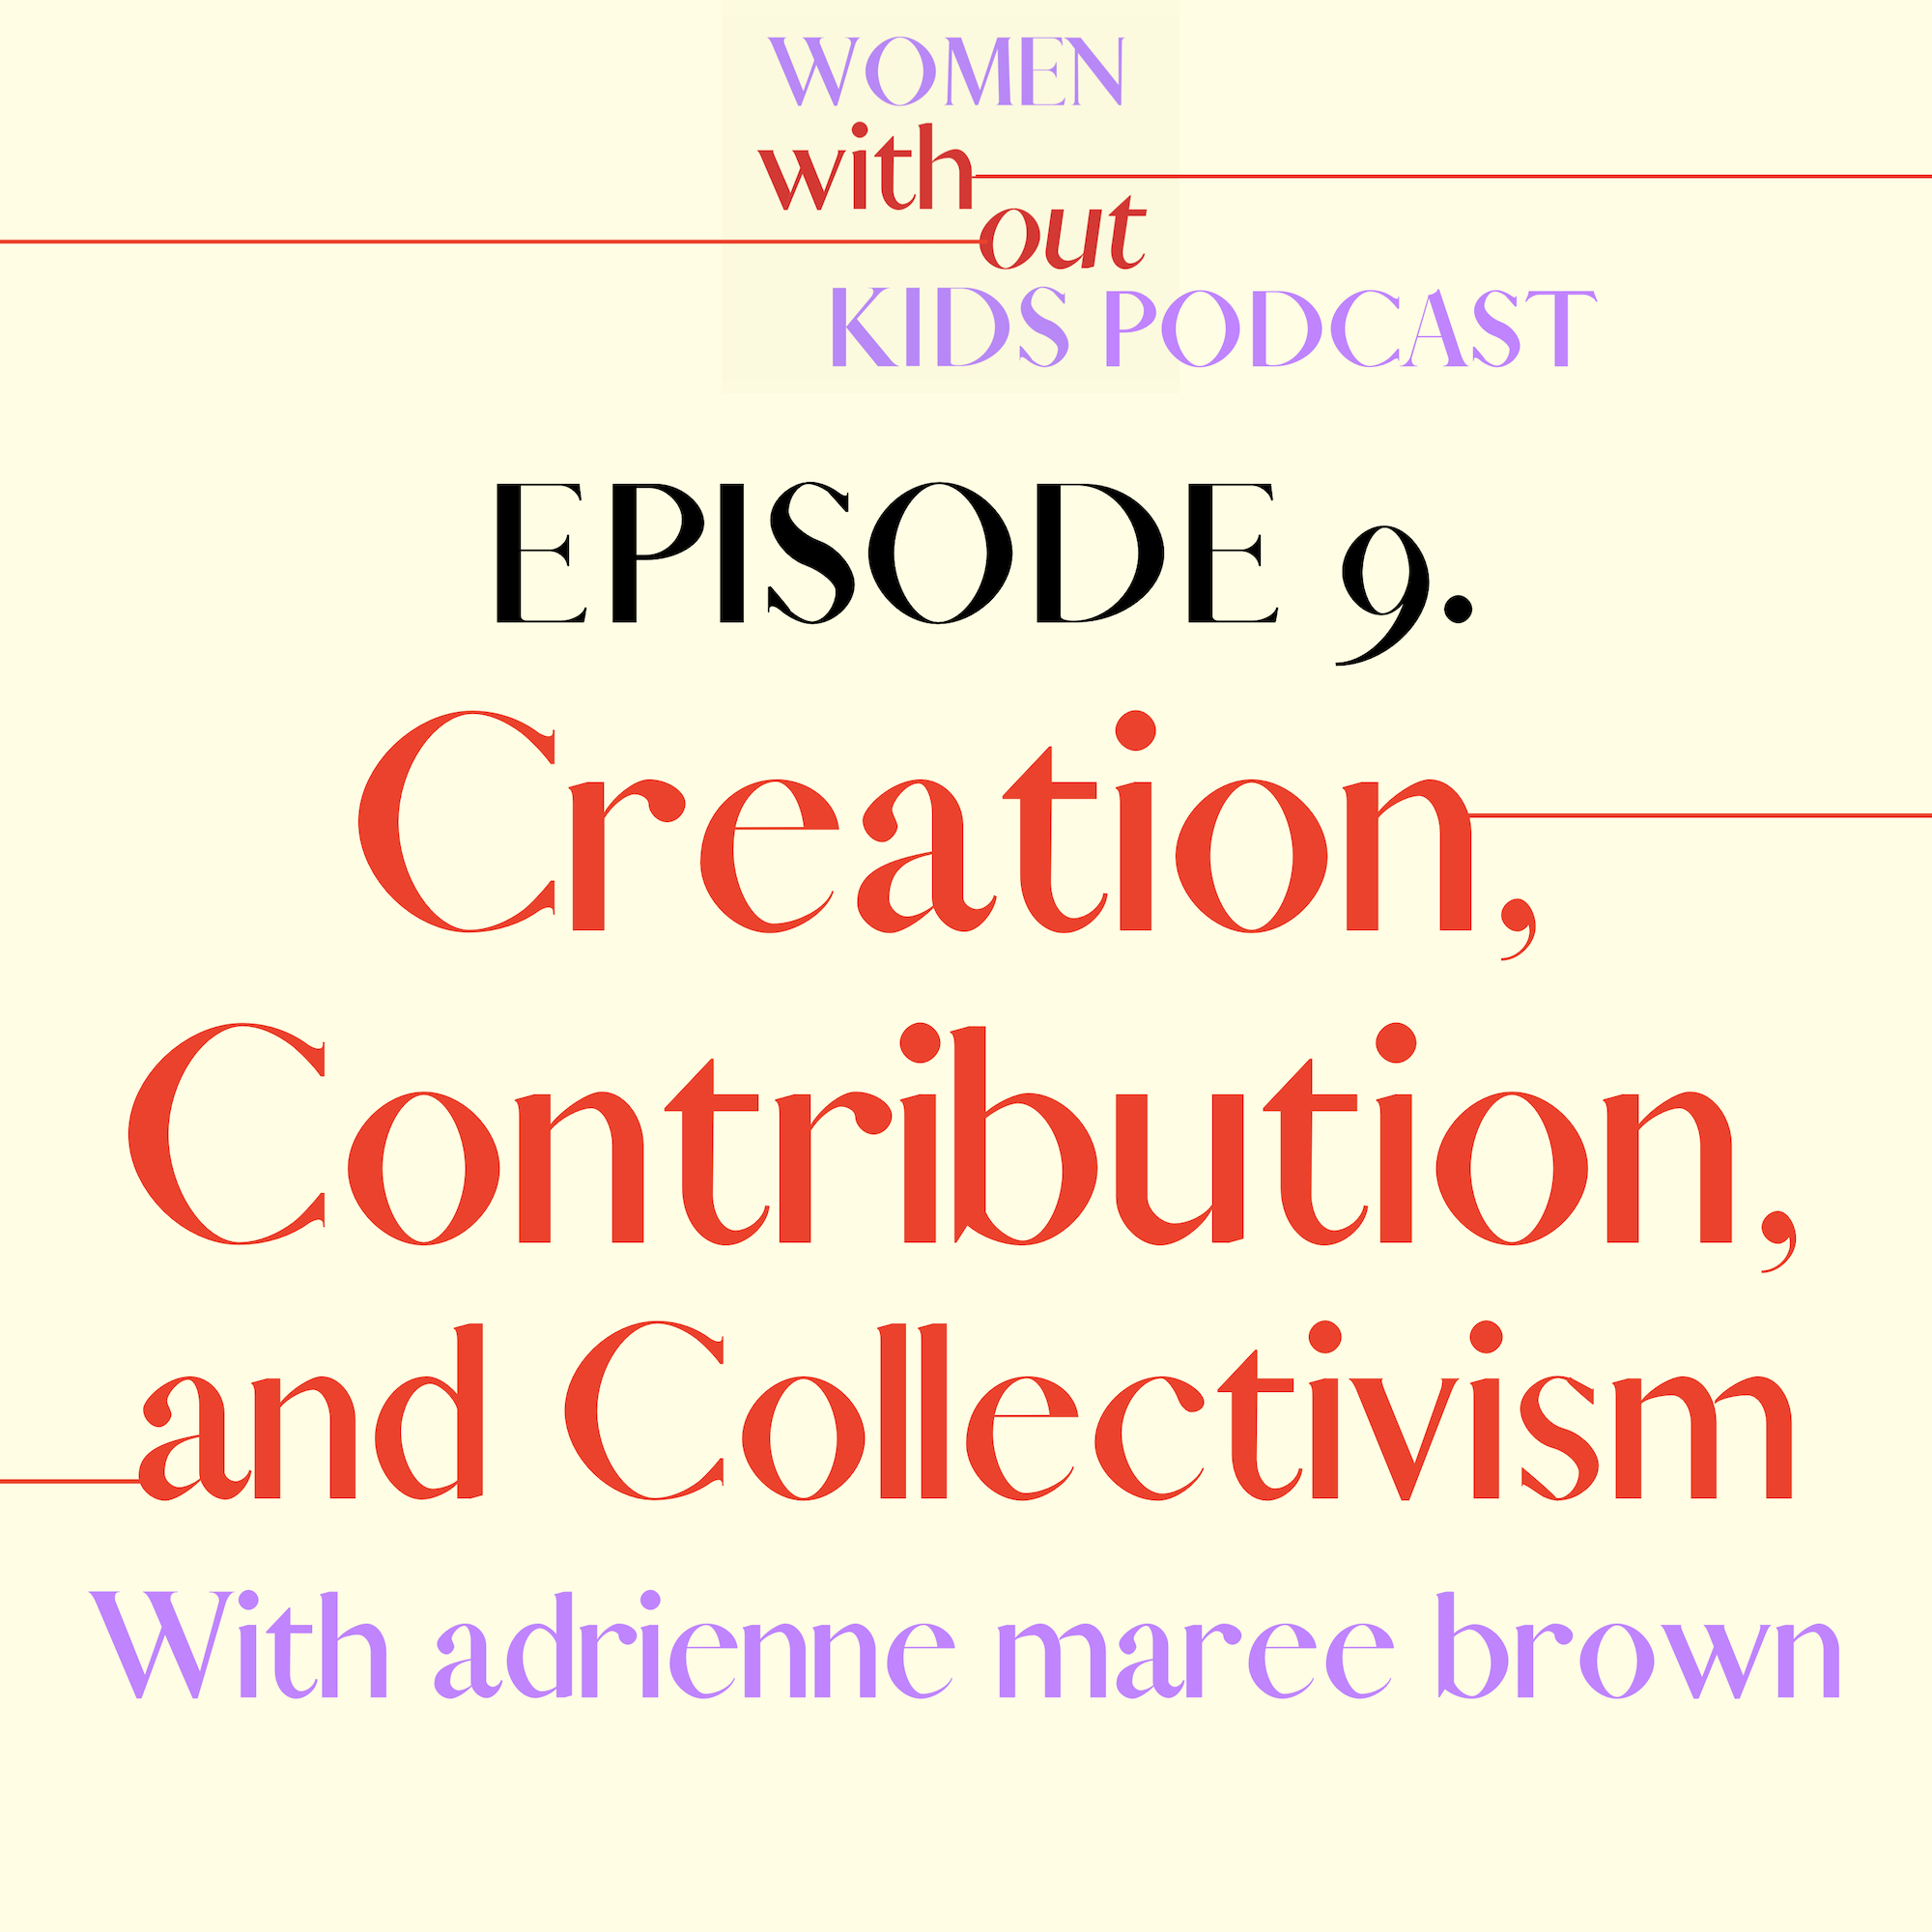 adrienne maree brown women without kids podcast